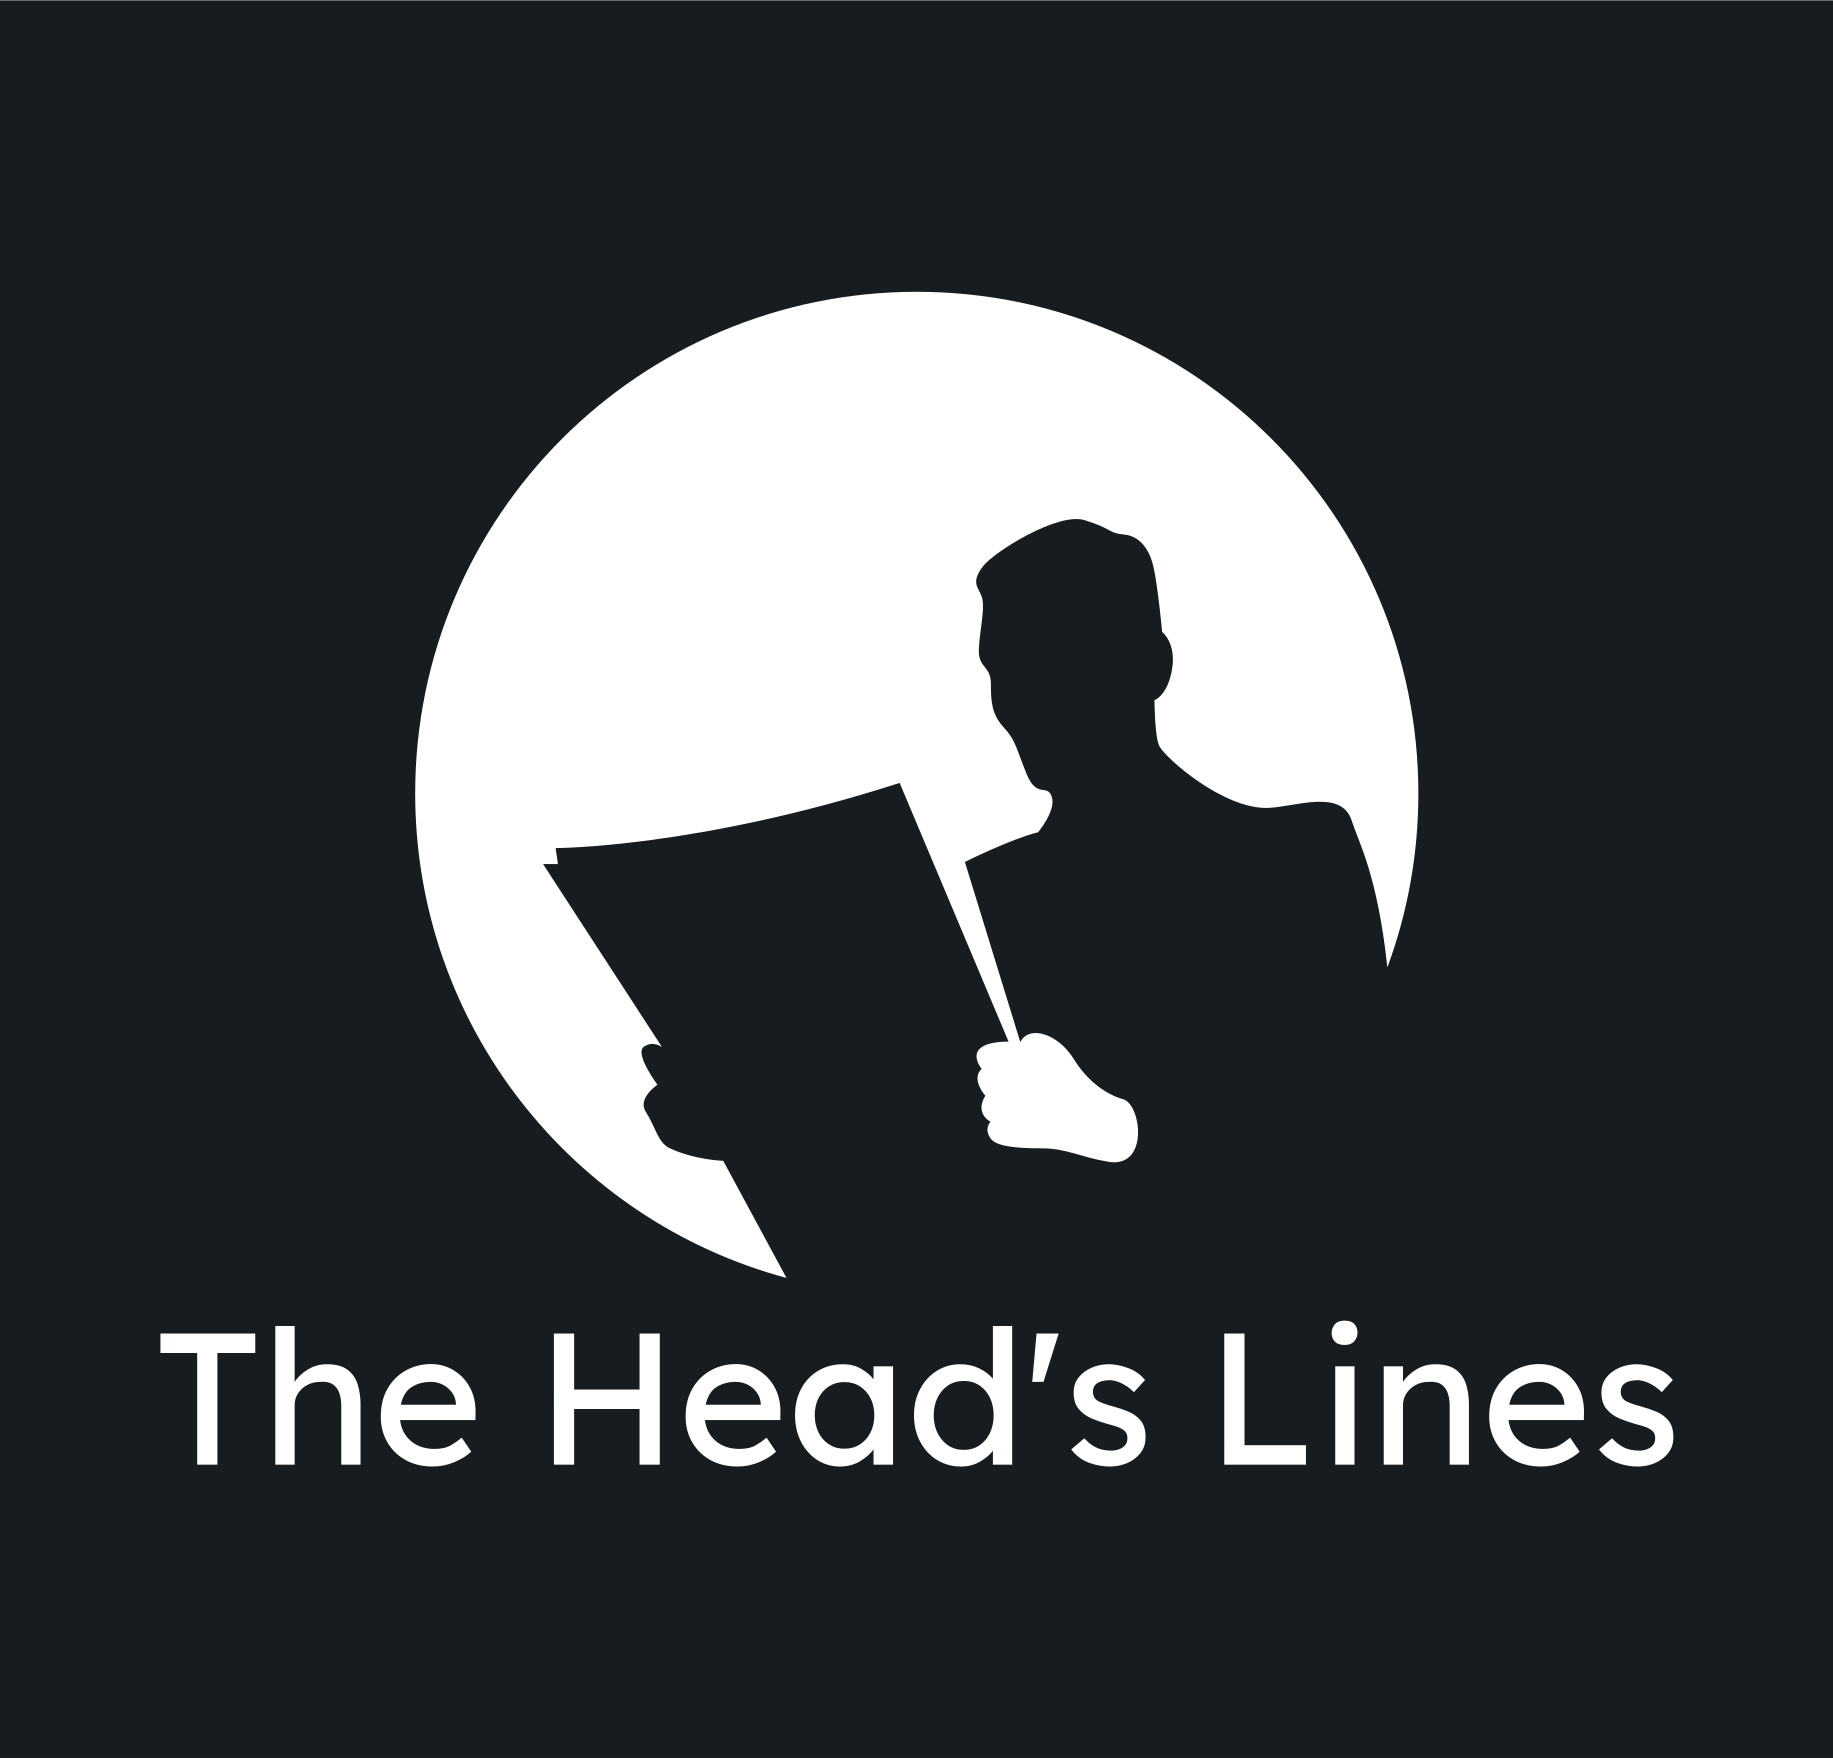 The Head's Lines